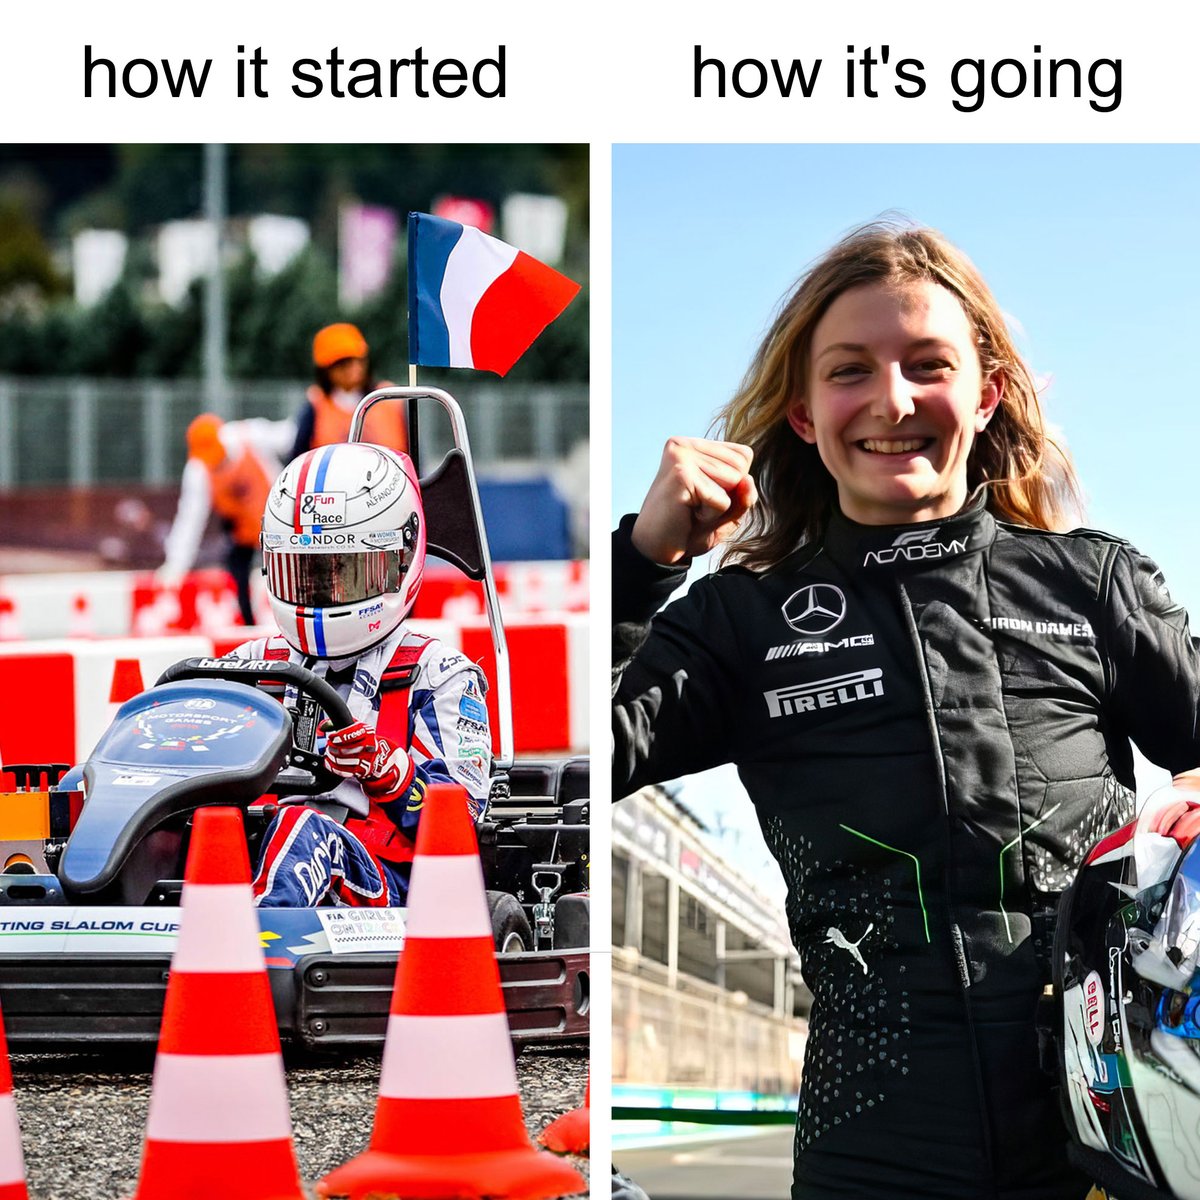 At the 2019 @FIA Motorsport Games in Rome, @DorianePin was a 15-year-old kart racer with a dream. Today, she dominated the opening round of @f1academy with a brilliant victory! 🏁🏆 Congratulations Doriane!! - #FIAMotorsportGames